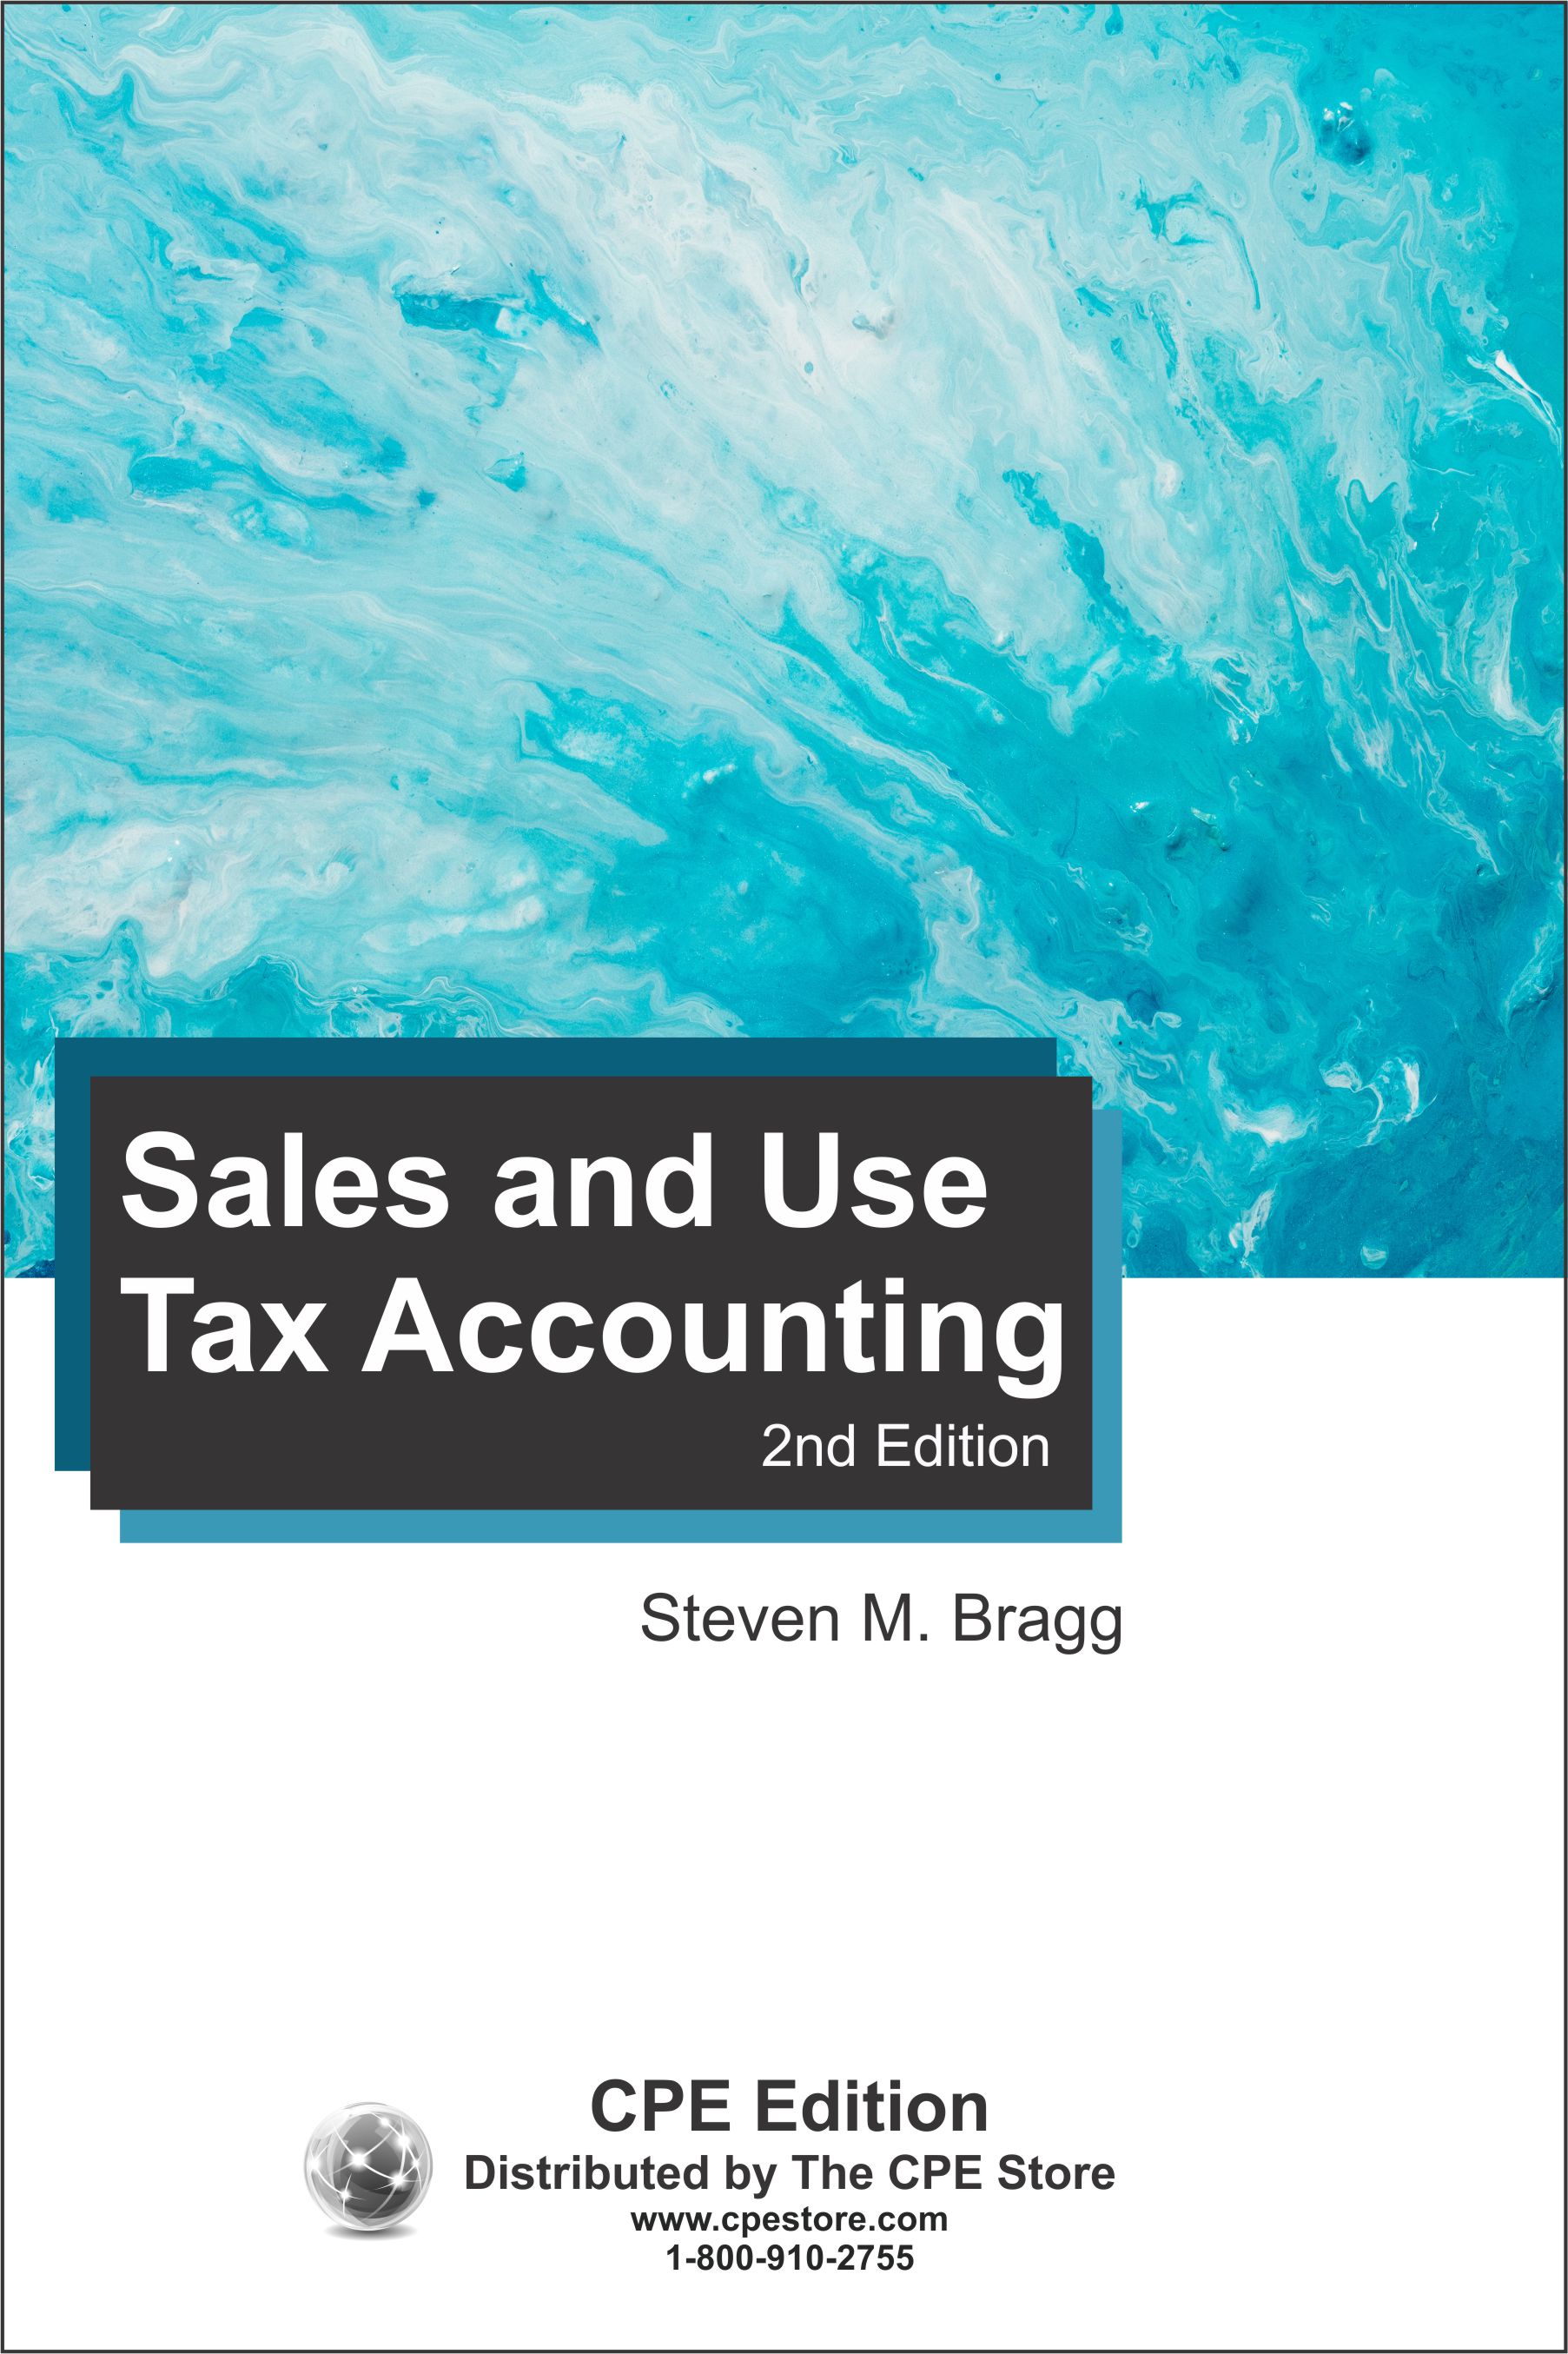 Sales and Use Tax Accounting